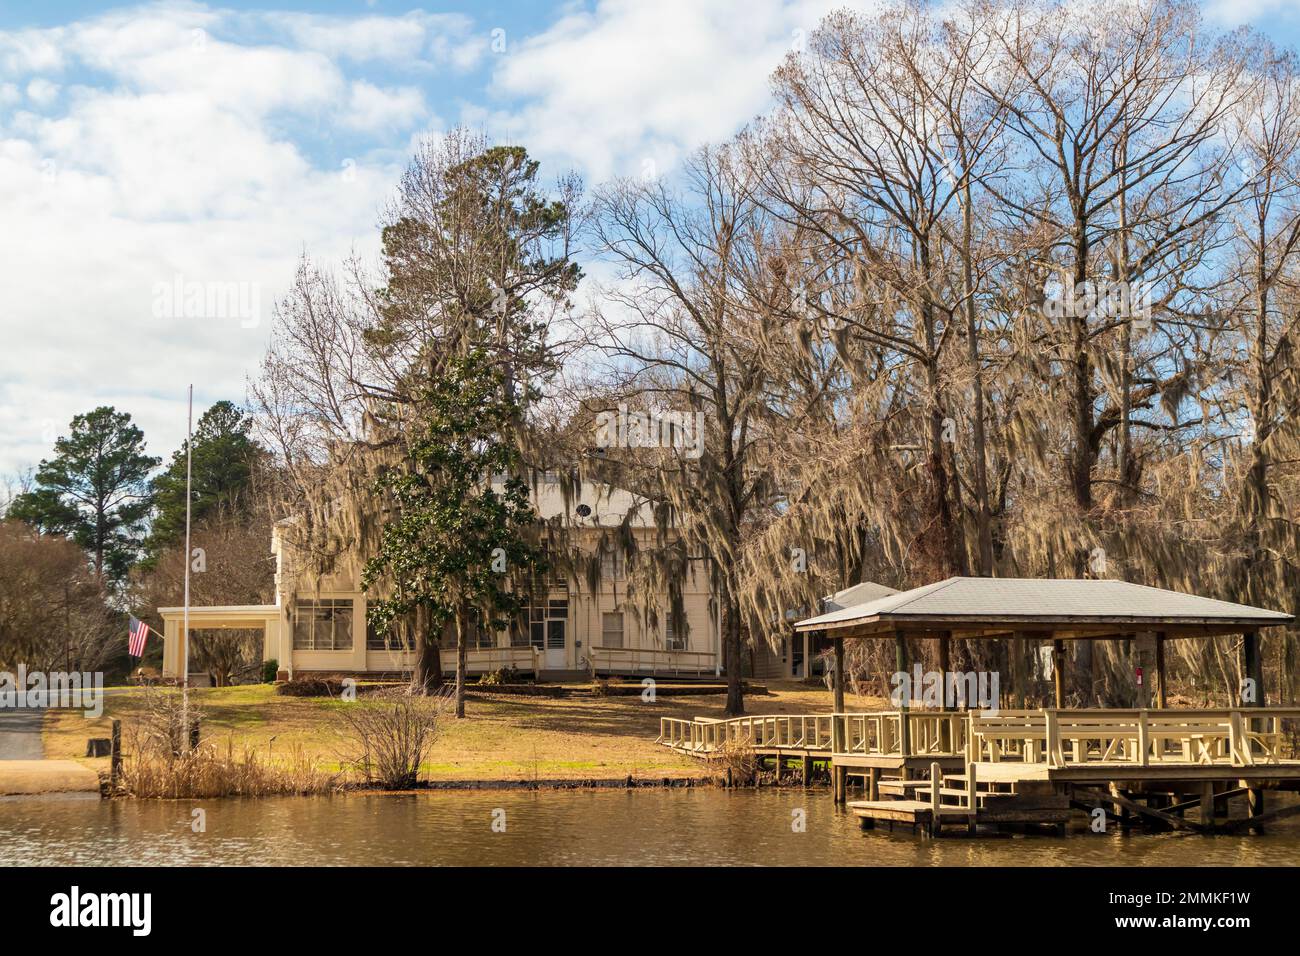 Karnack, Texas - January 15, 2023: A residential house on the shore of scenic Caddo Lake in Texas Stock Photo